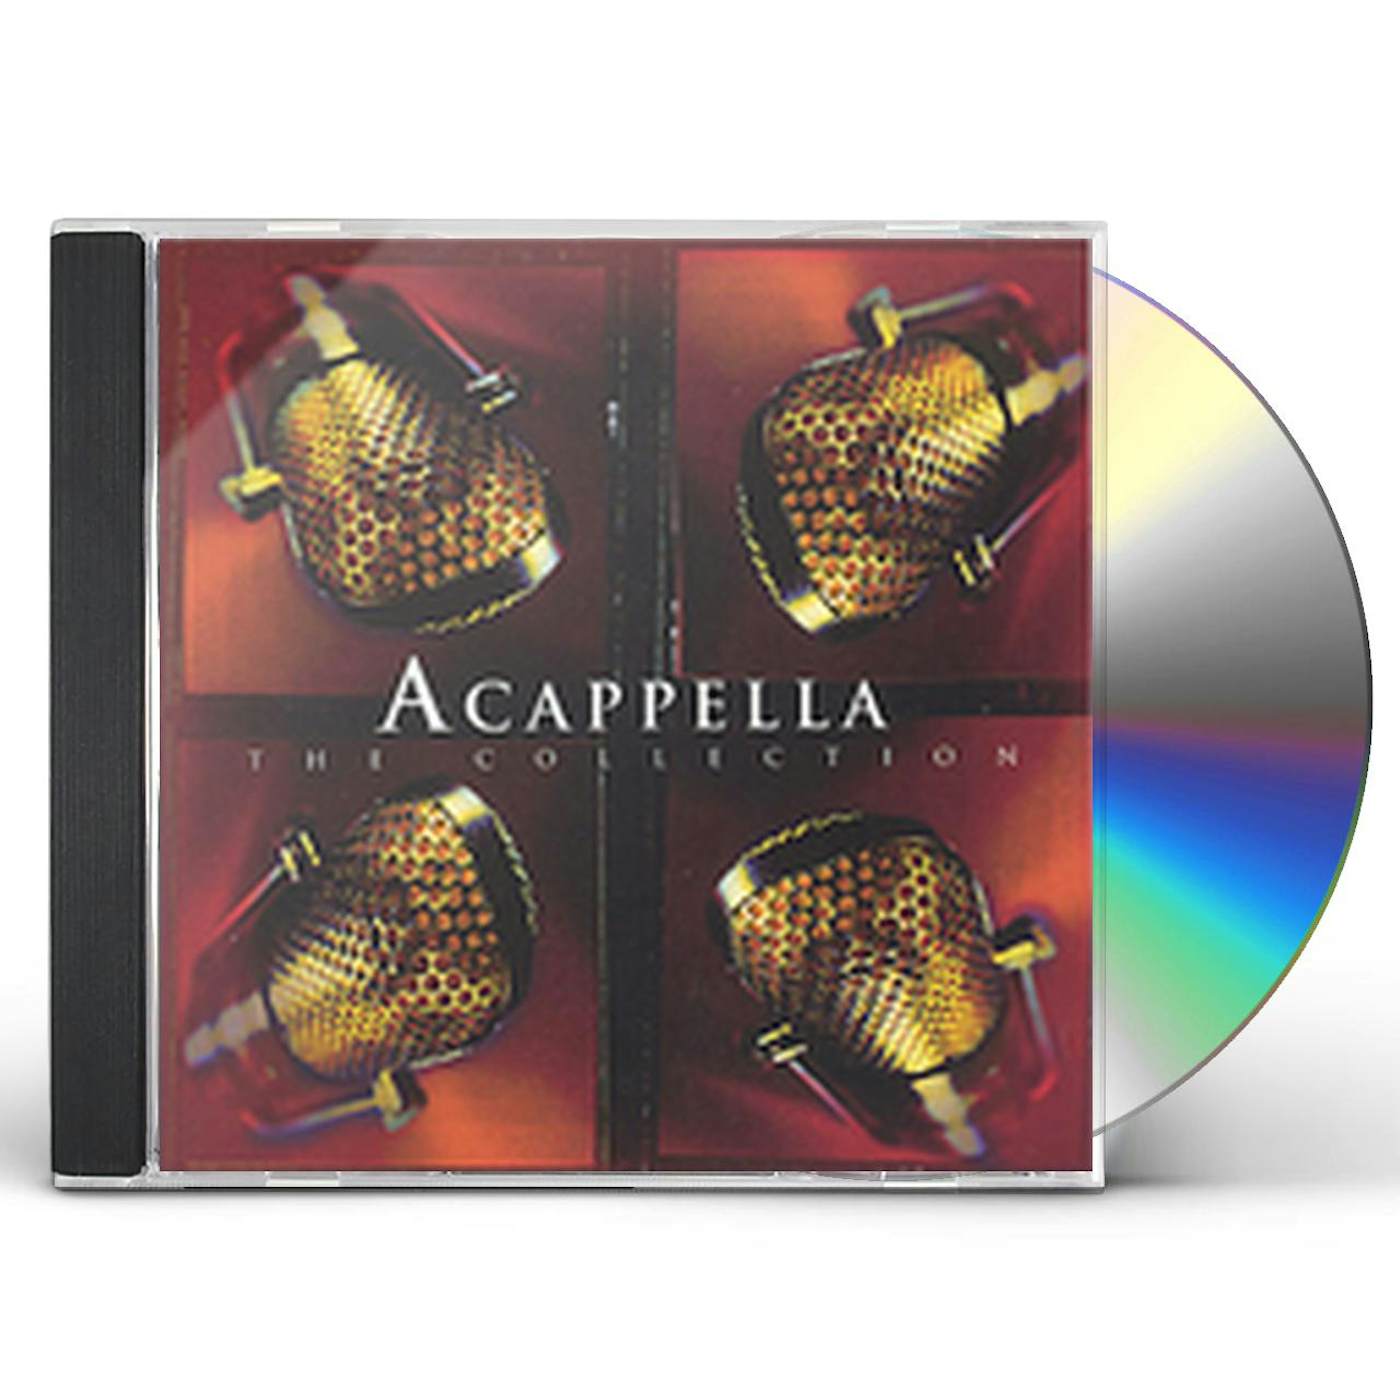 Acappella COLLECTION CD